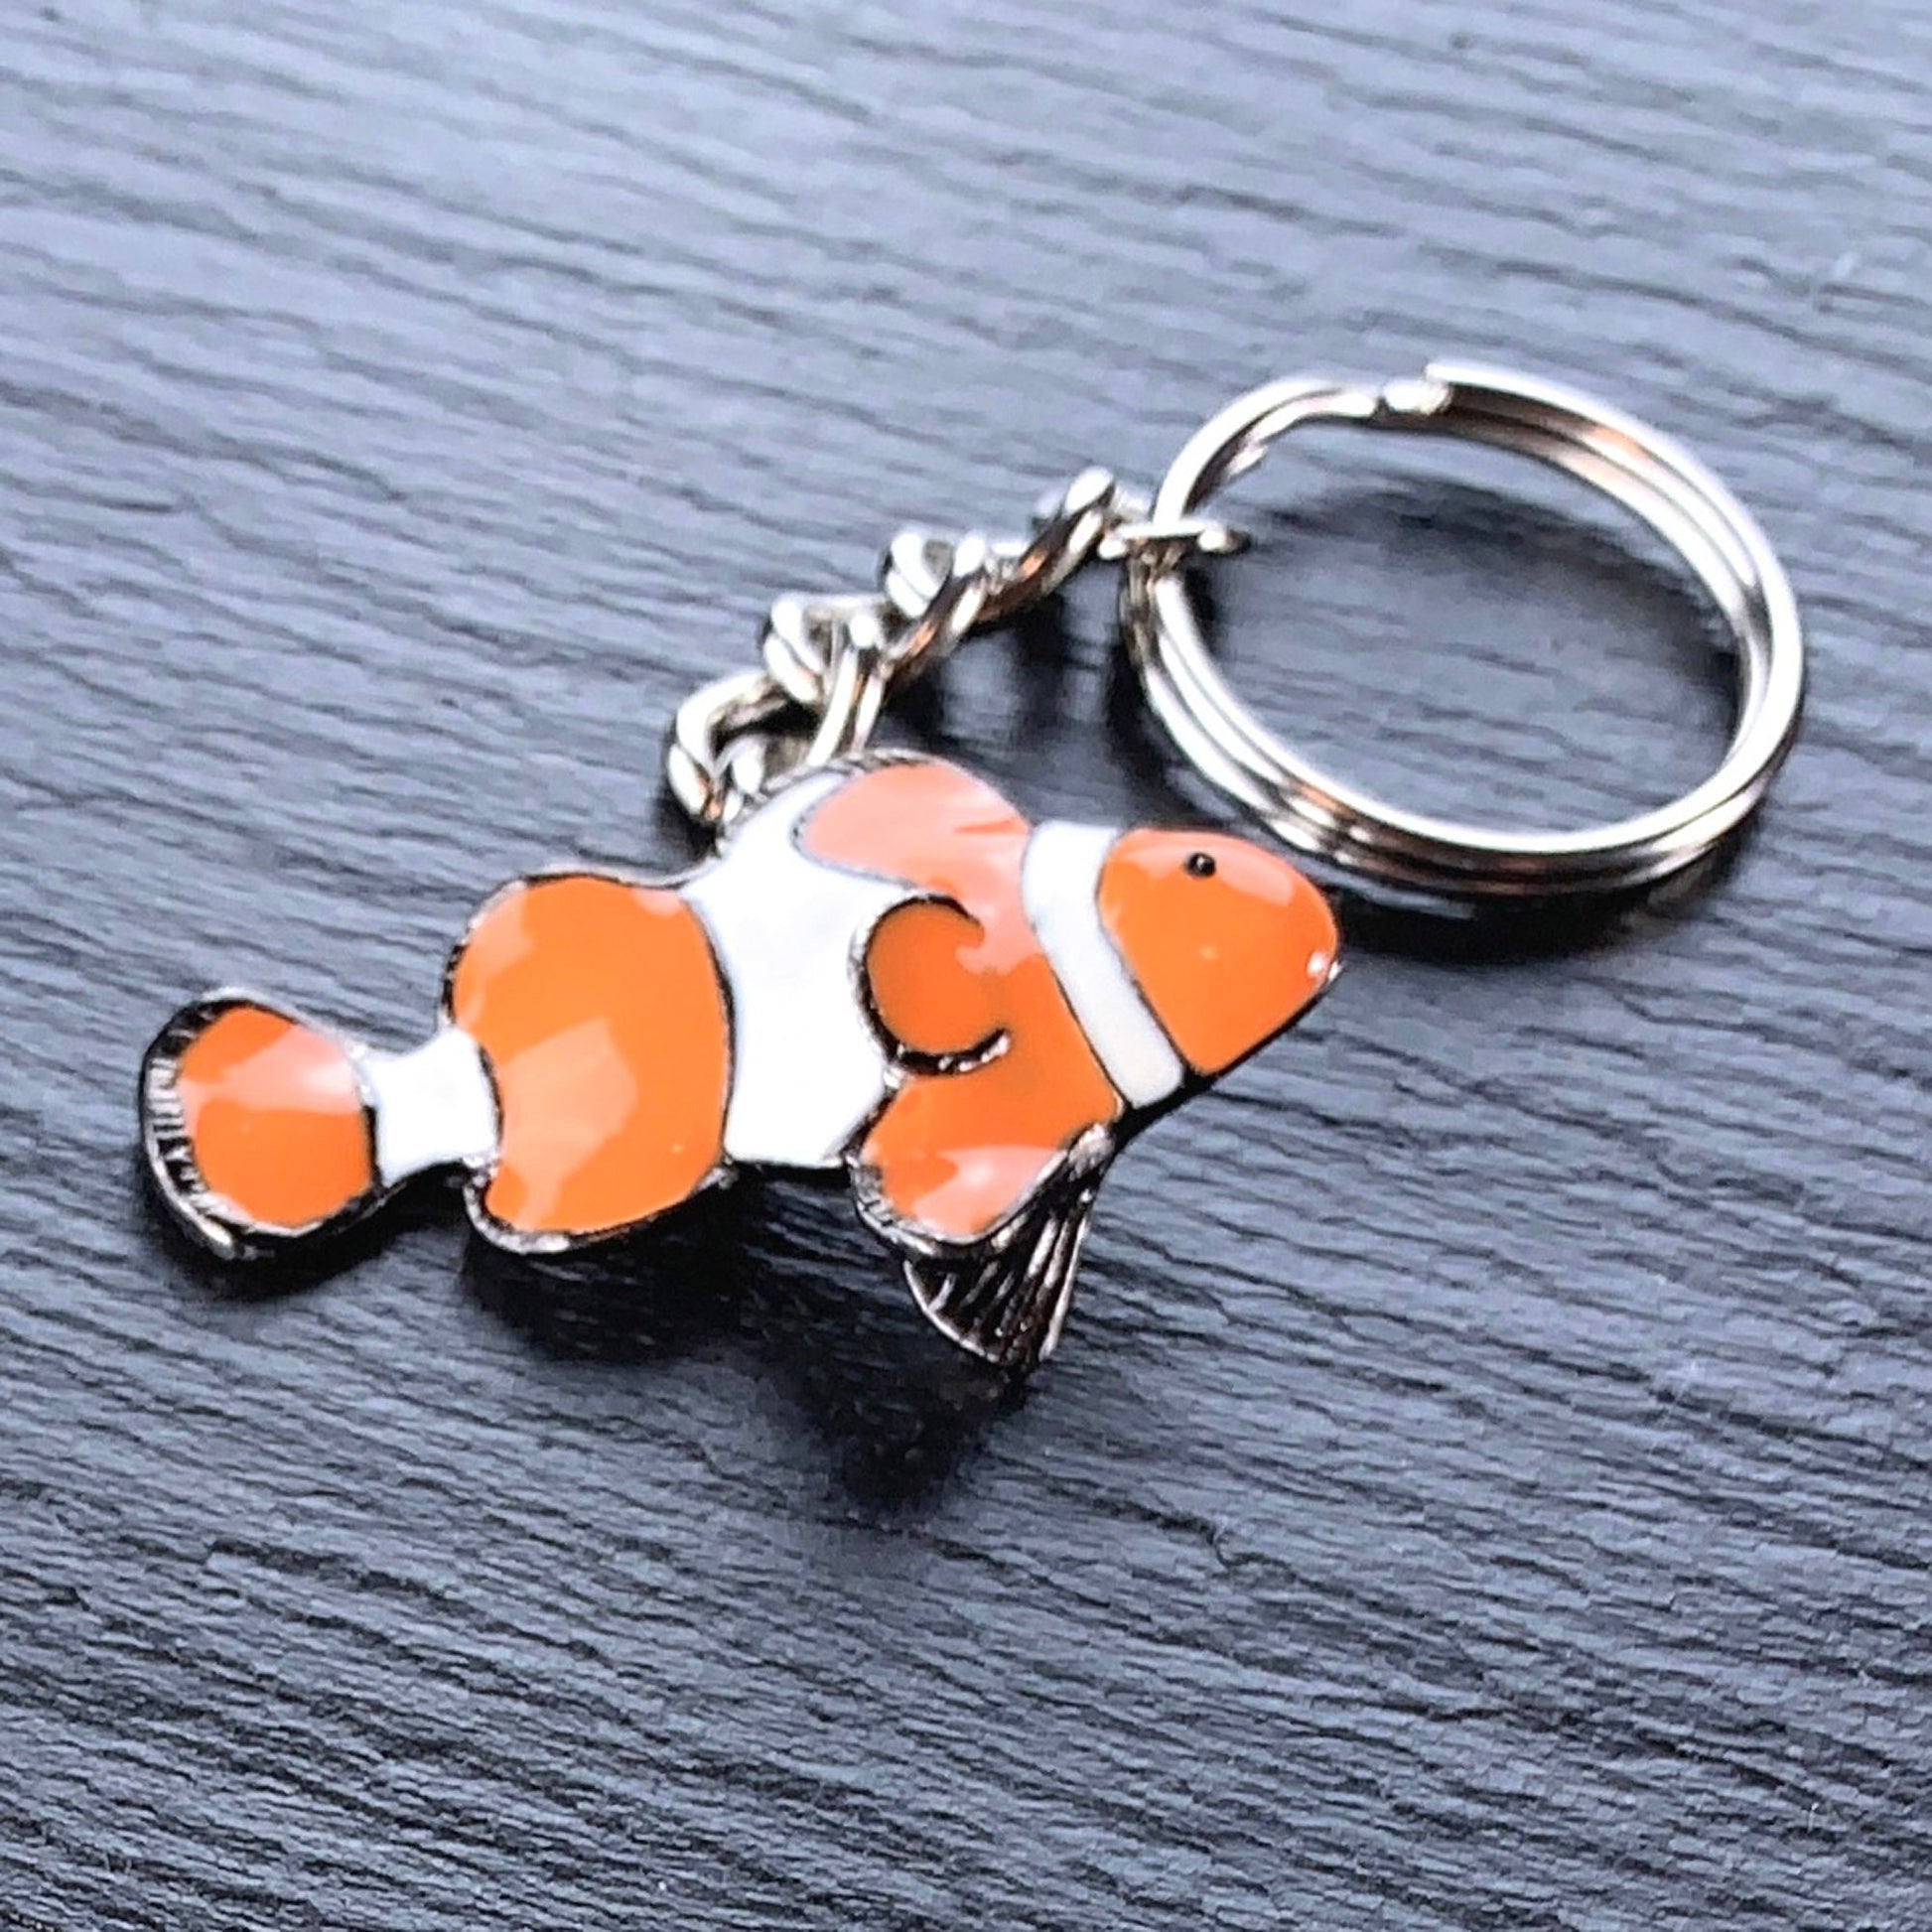 Clown Fish Keychain for Women and Teens-Key Chain Gift for Women, Clown Fish Key Ring, Clown Fish Charm, Gifts for Ocean Lovers, Pewter Keychains - The Tool Store